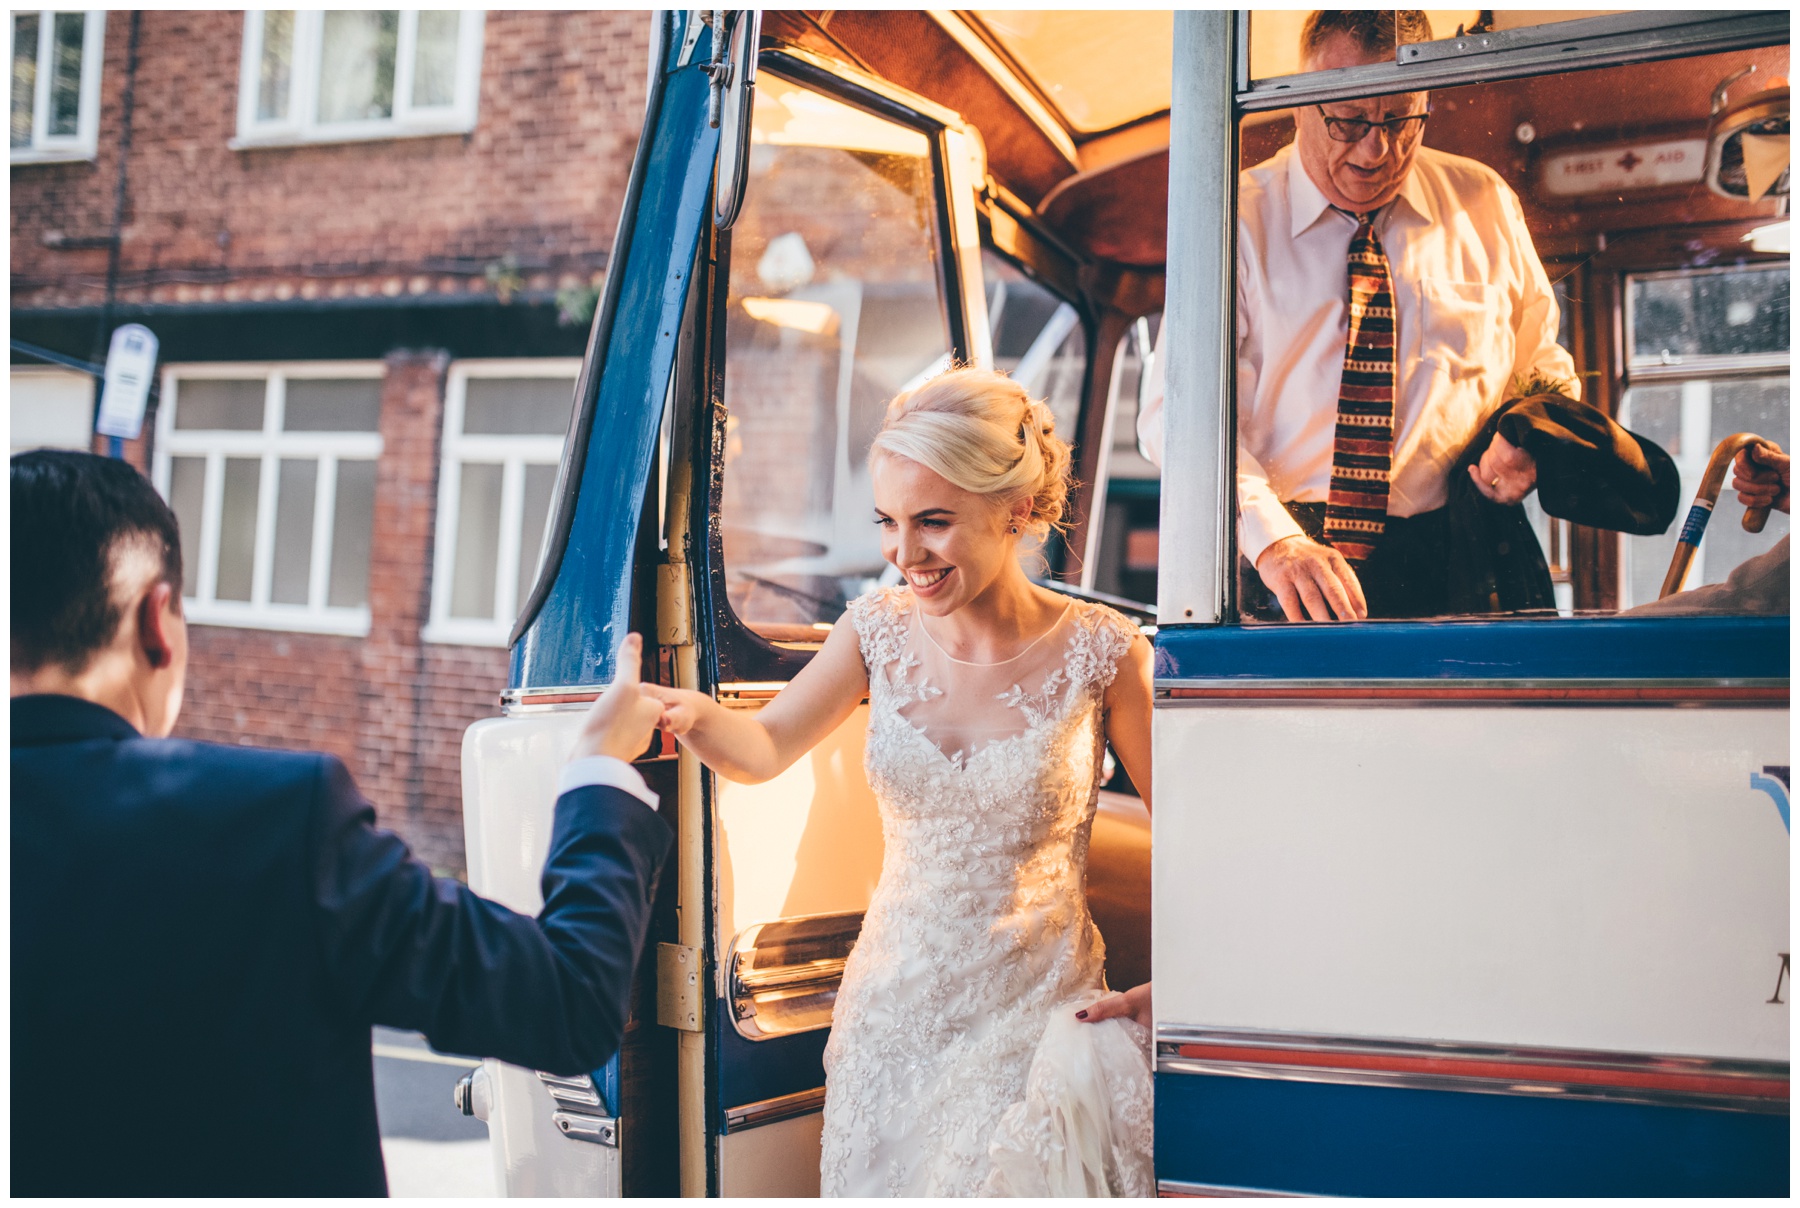 Vintage wedding bus arrives at The Hide in Sheffield City Centre.